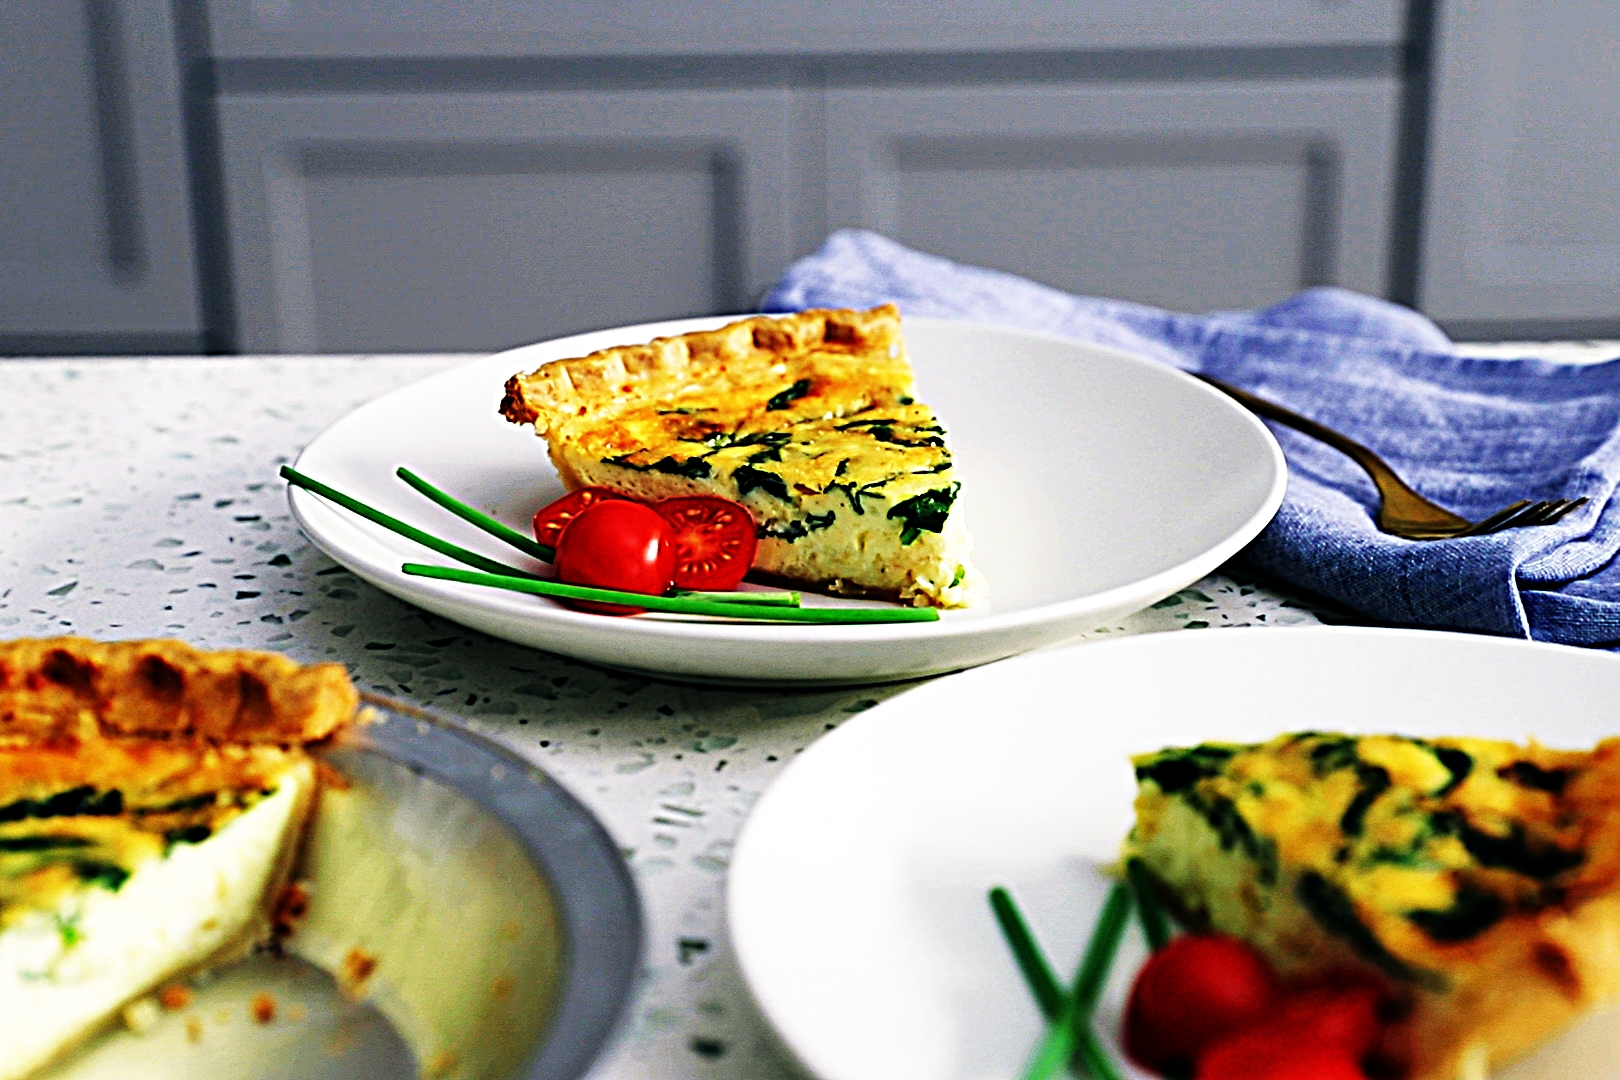 Stupid-Easy Recipe for Spinach and Cheese Quiche (#1 Top-Rated)